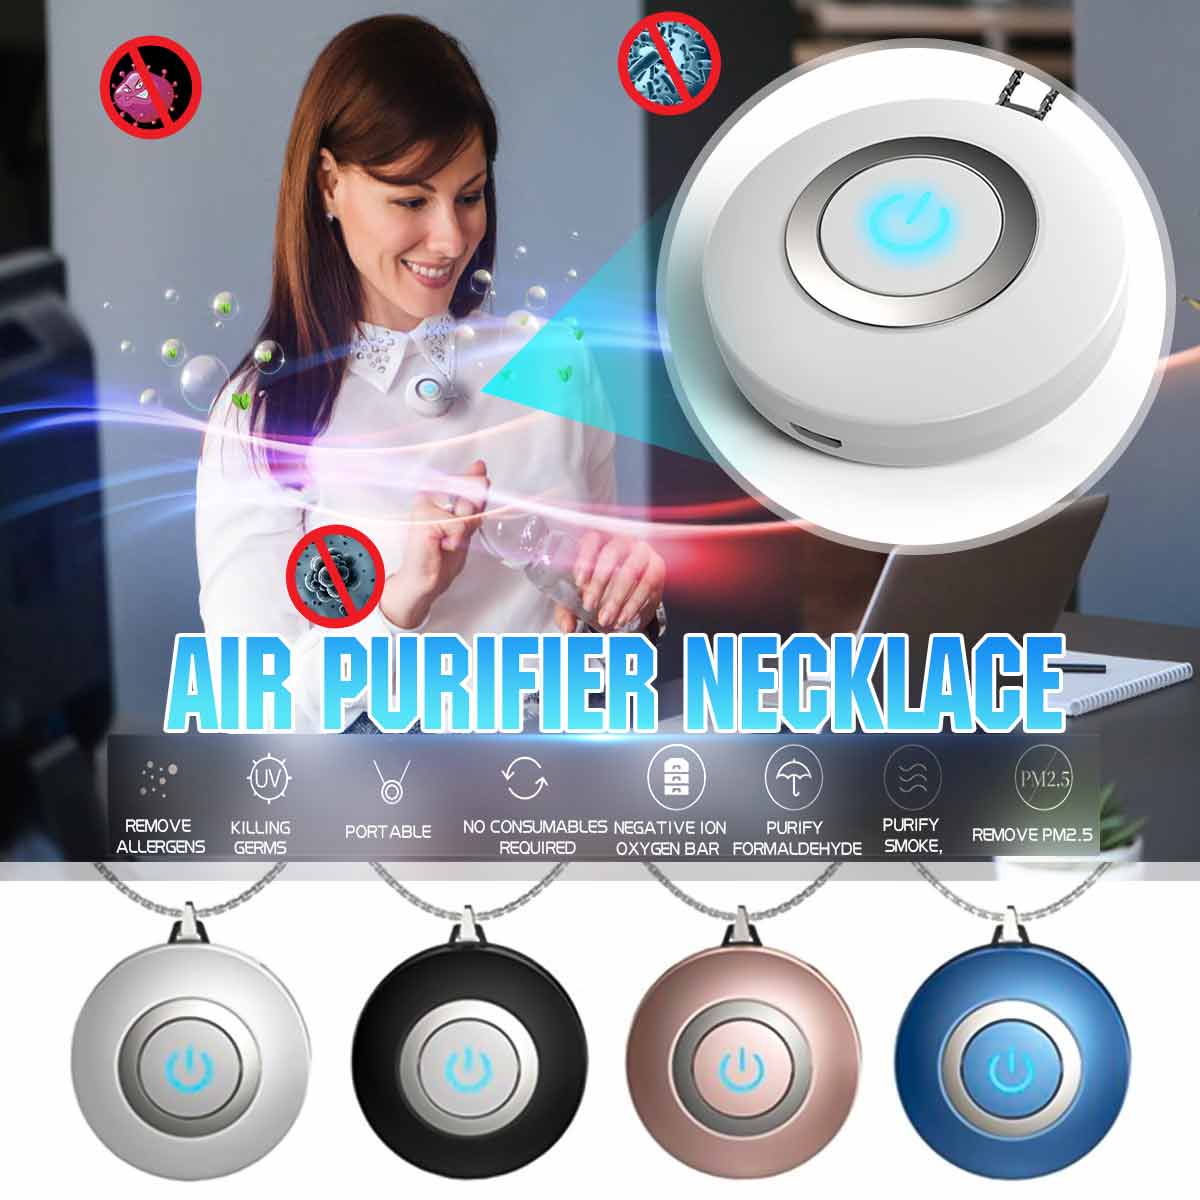 Wearable-Air-Purifier-Necklace-Ionizer-Ion-Generator-Odor-and-Smoke-Remover-1649109-1